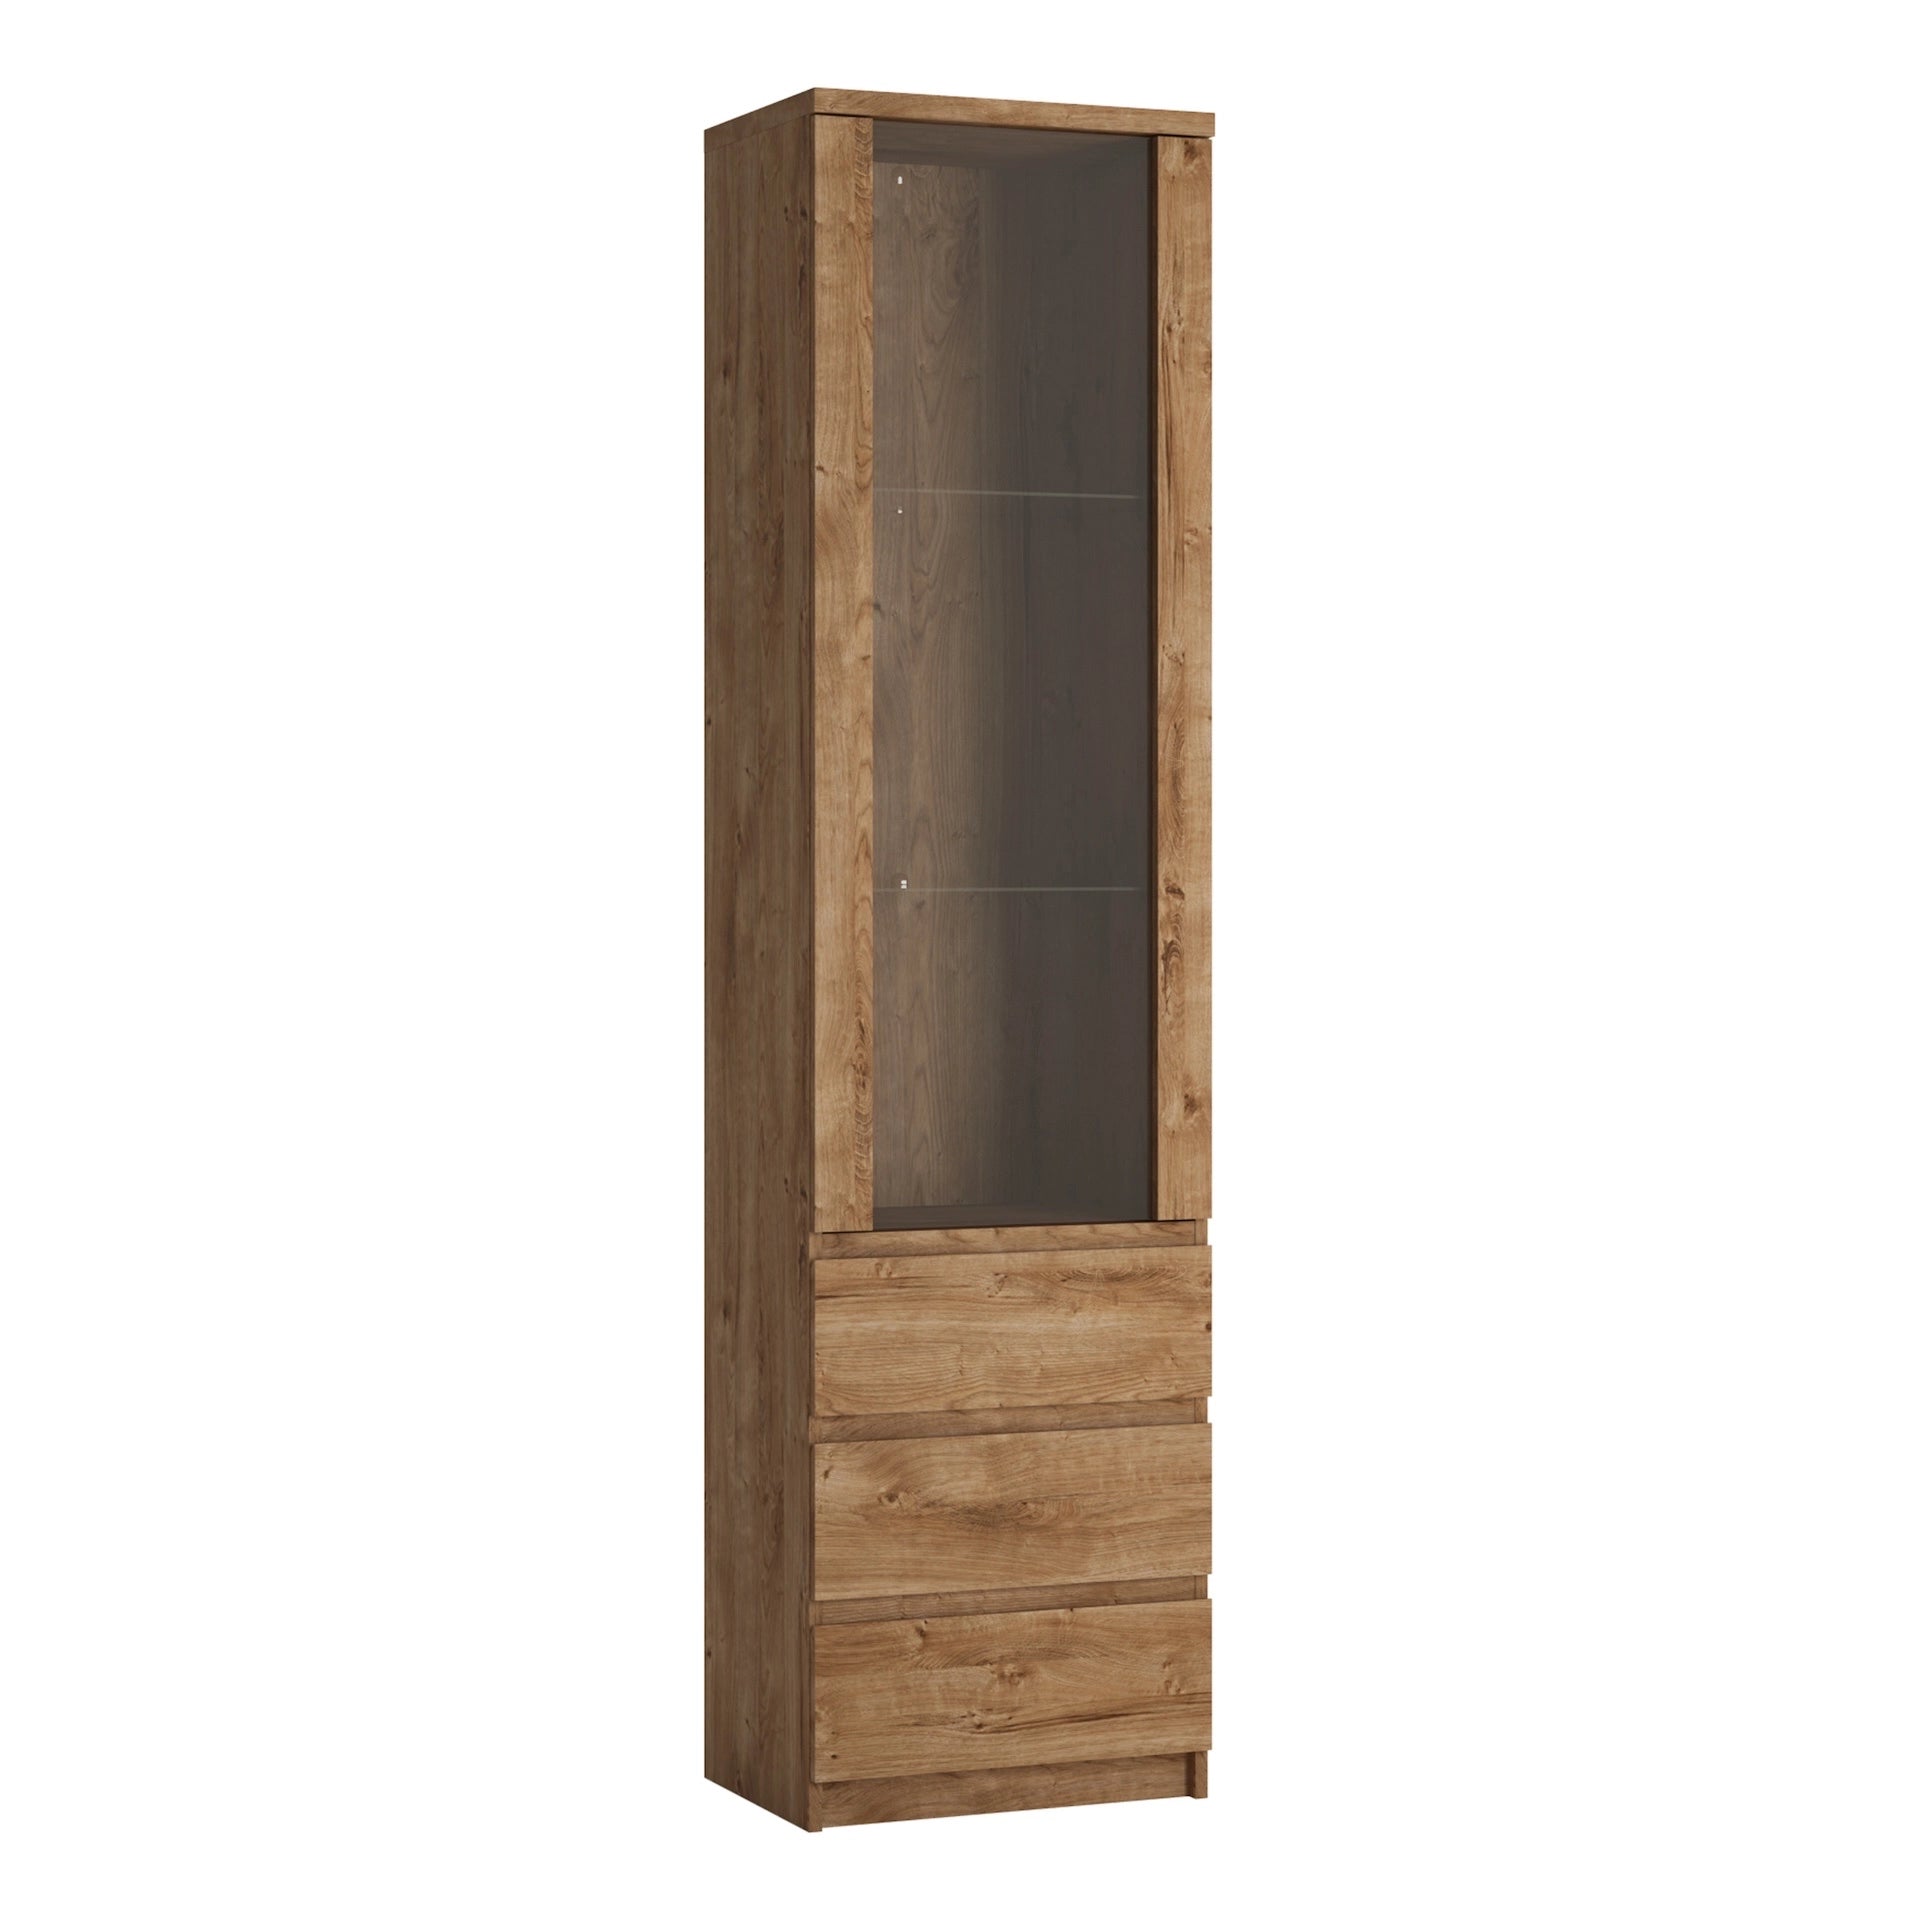 Furniture To Go Fribo Tall Narrow 1 Door 3 Drawer Glazed Display Cabinet in Oak